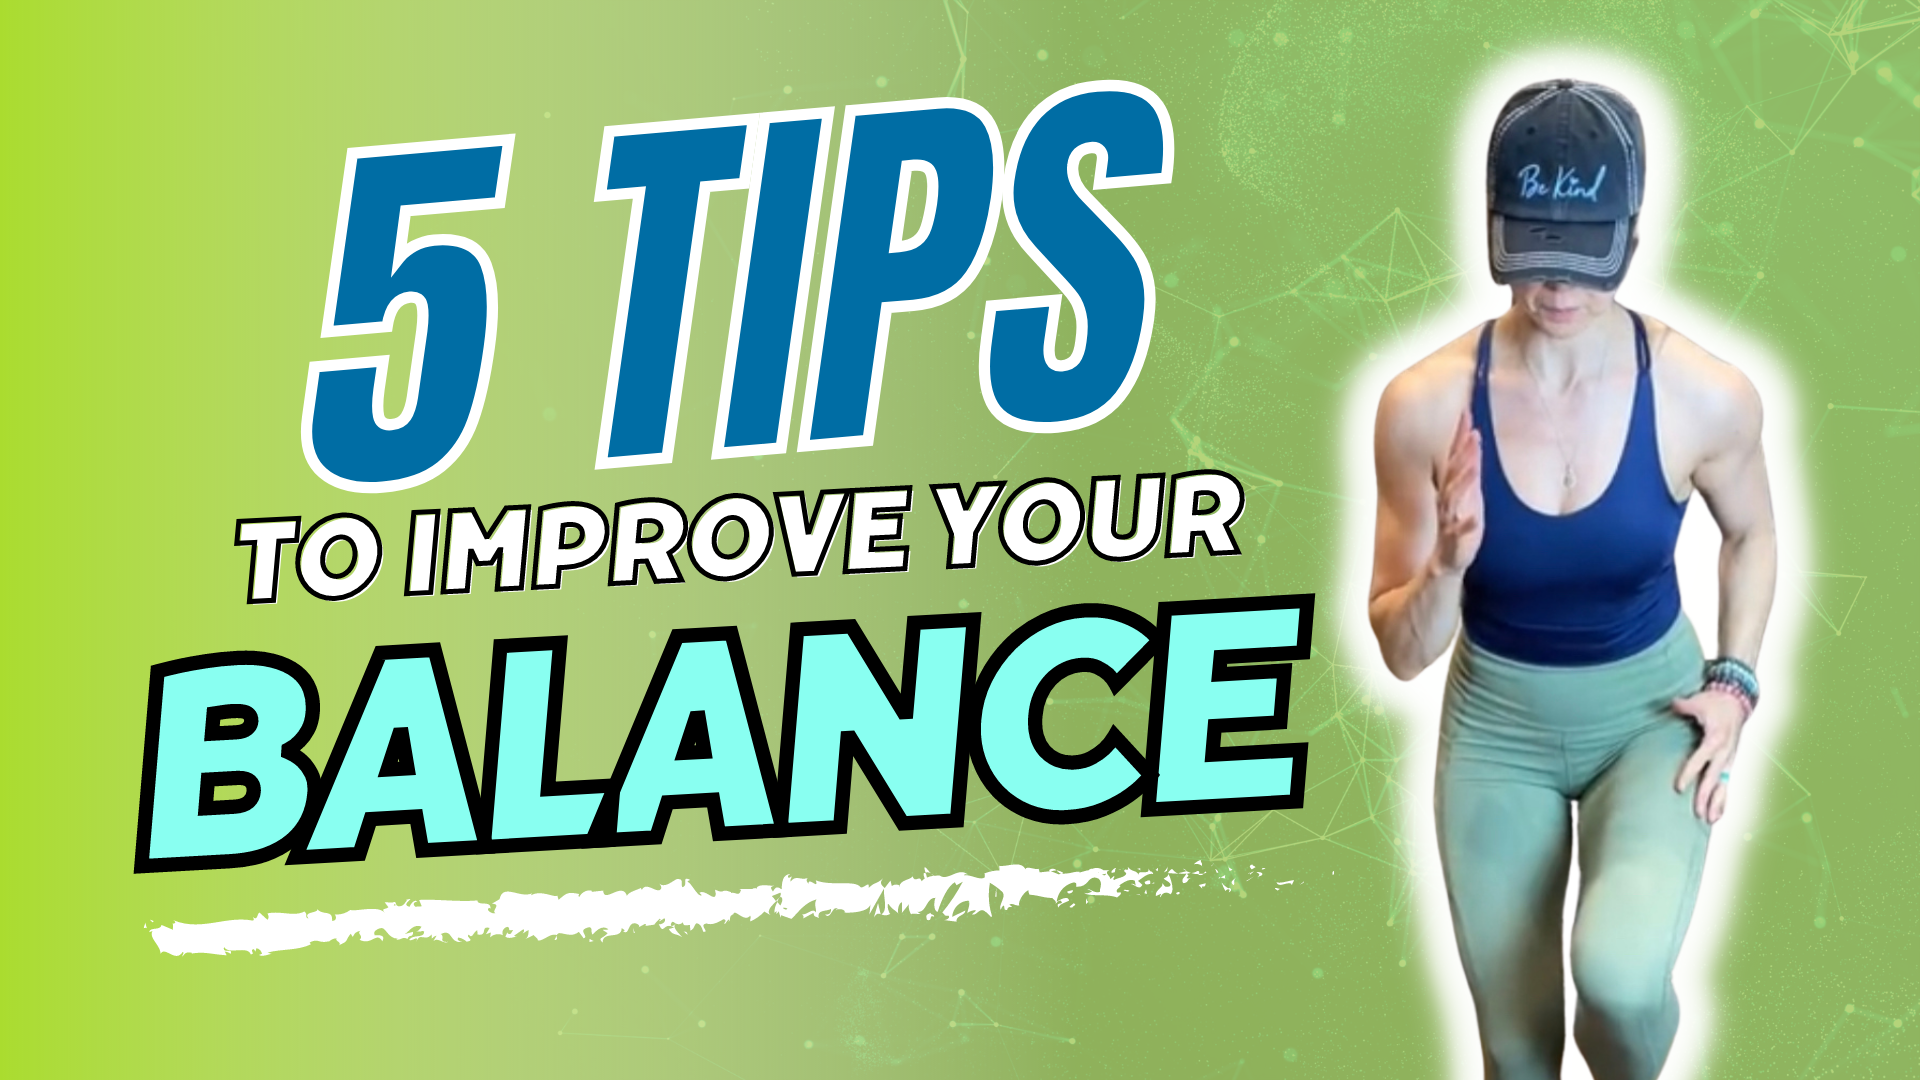 5 Tips to Improve Your Balance